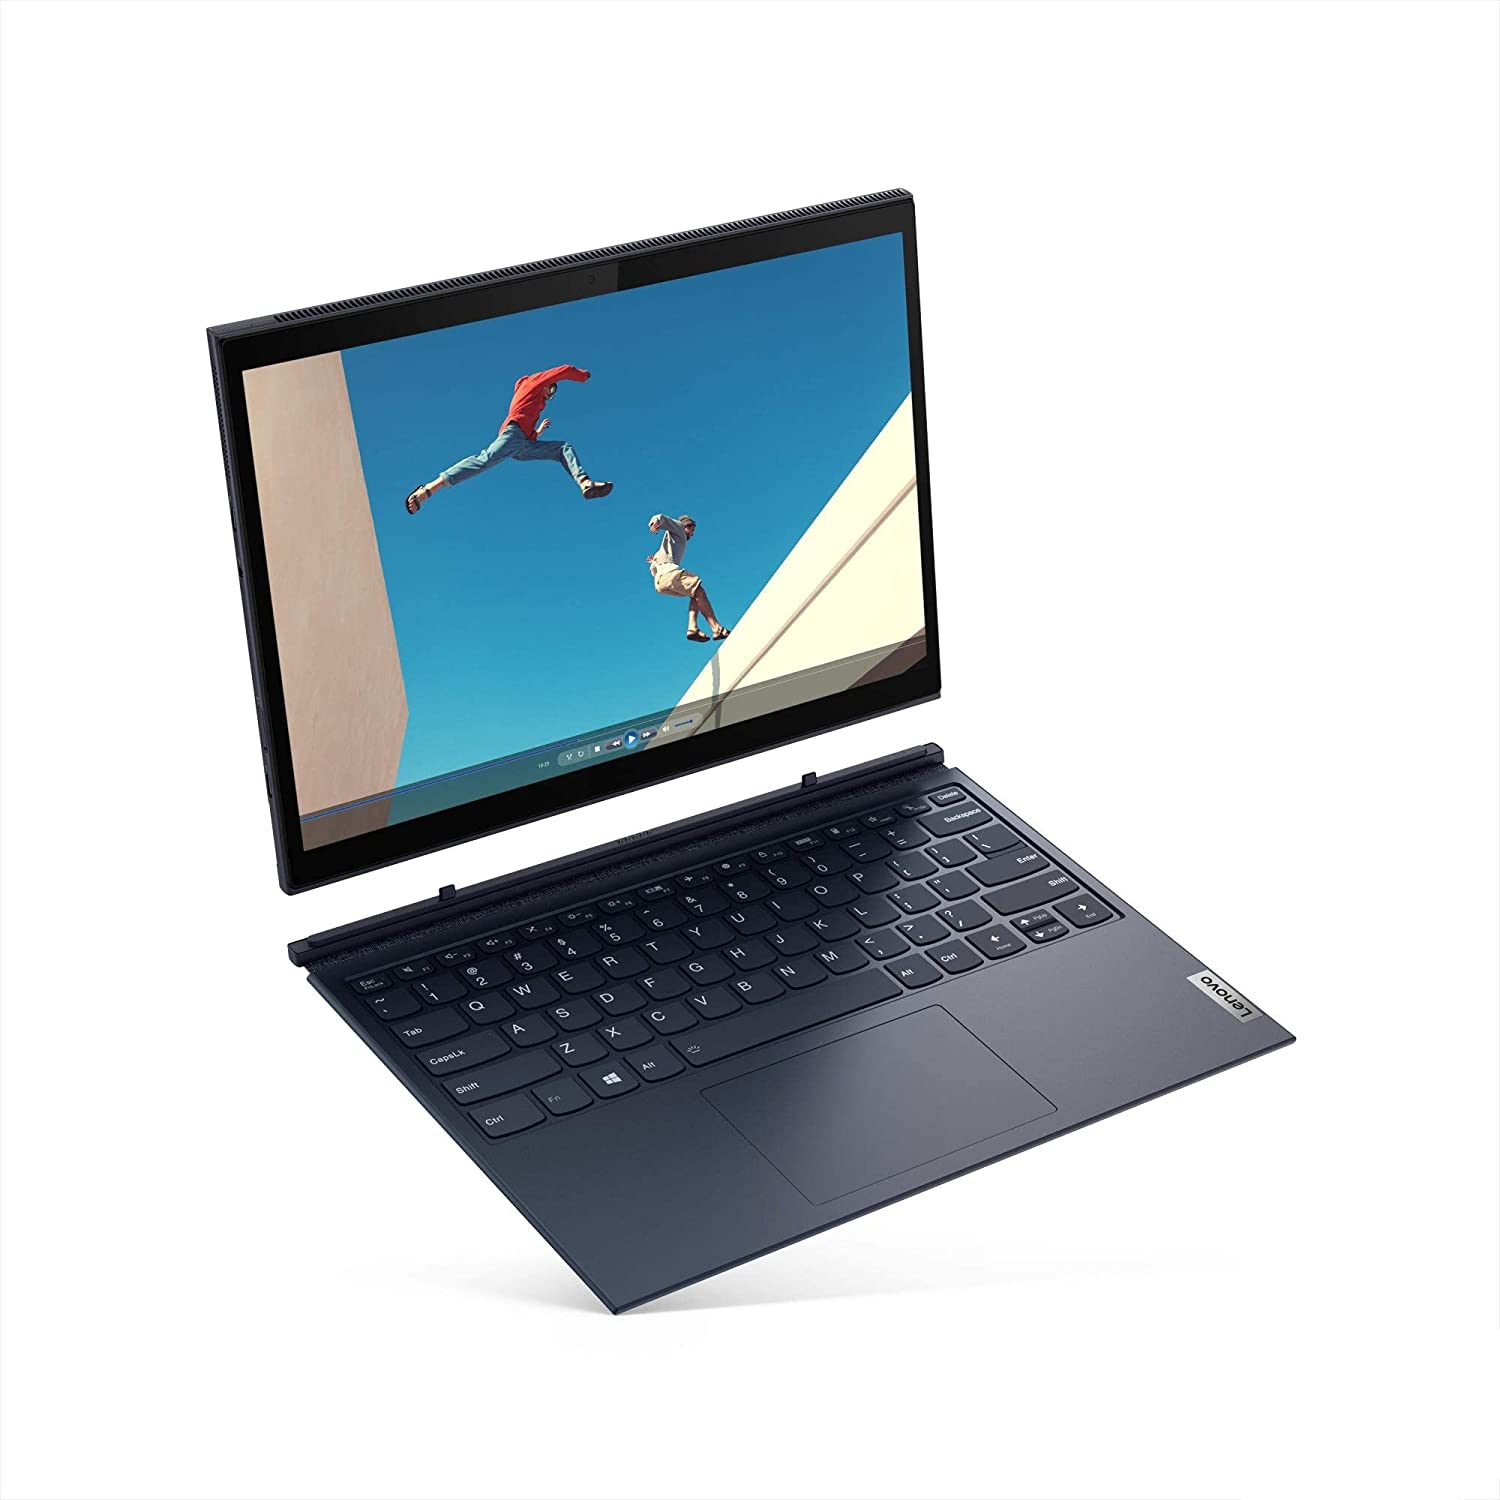 Lenovo Yoga Duet 2 in 1 laptop with 13" 2K multi-touch display, Intel Core i5-1135G7, Integrated Iris Xe Graphics, 8GB RAM, 512GB SSD